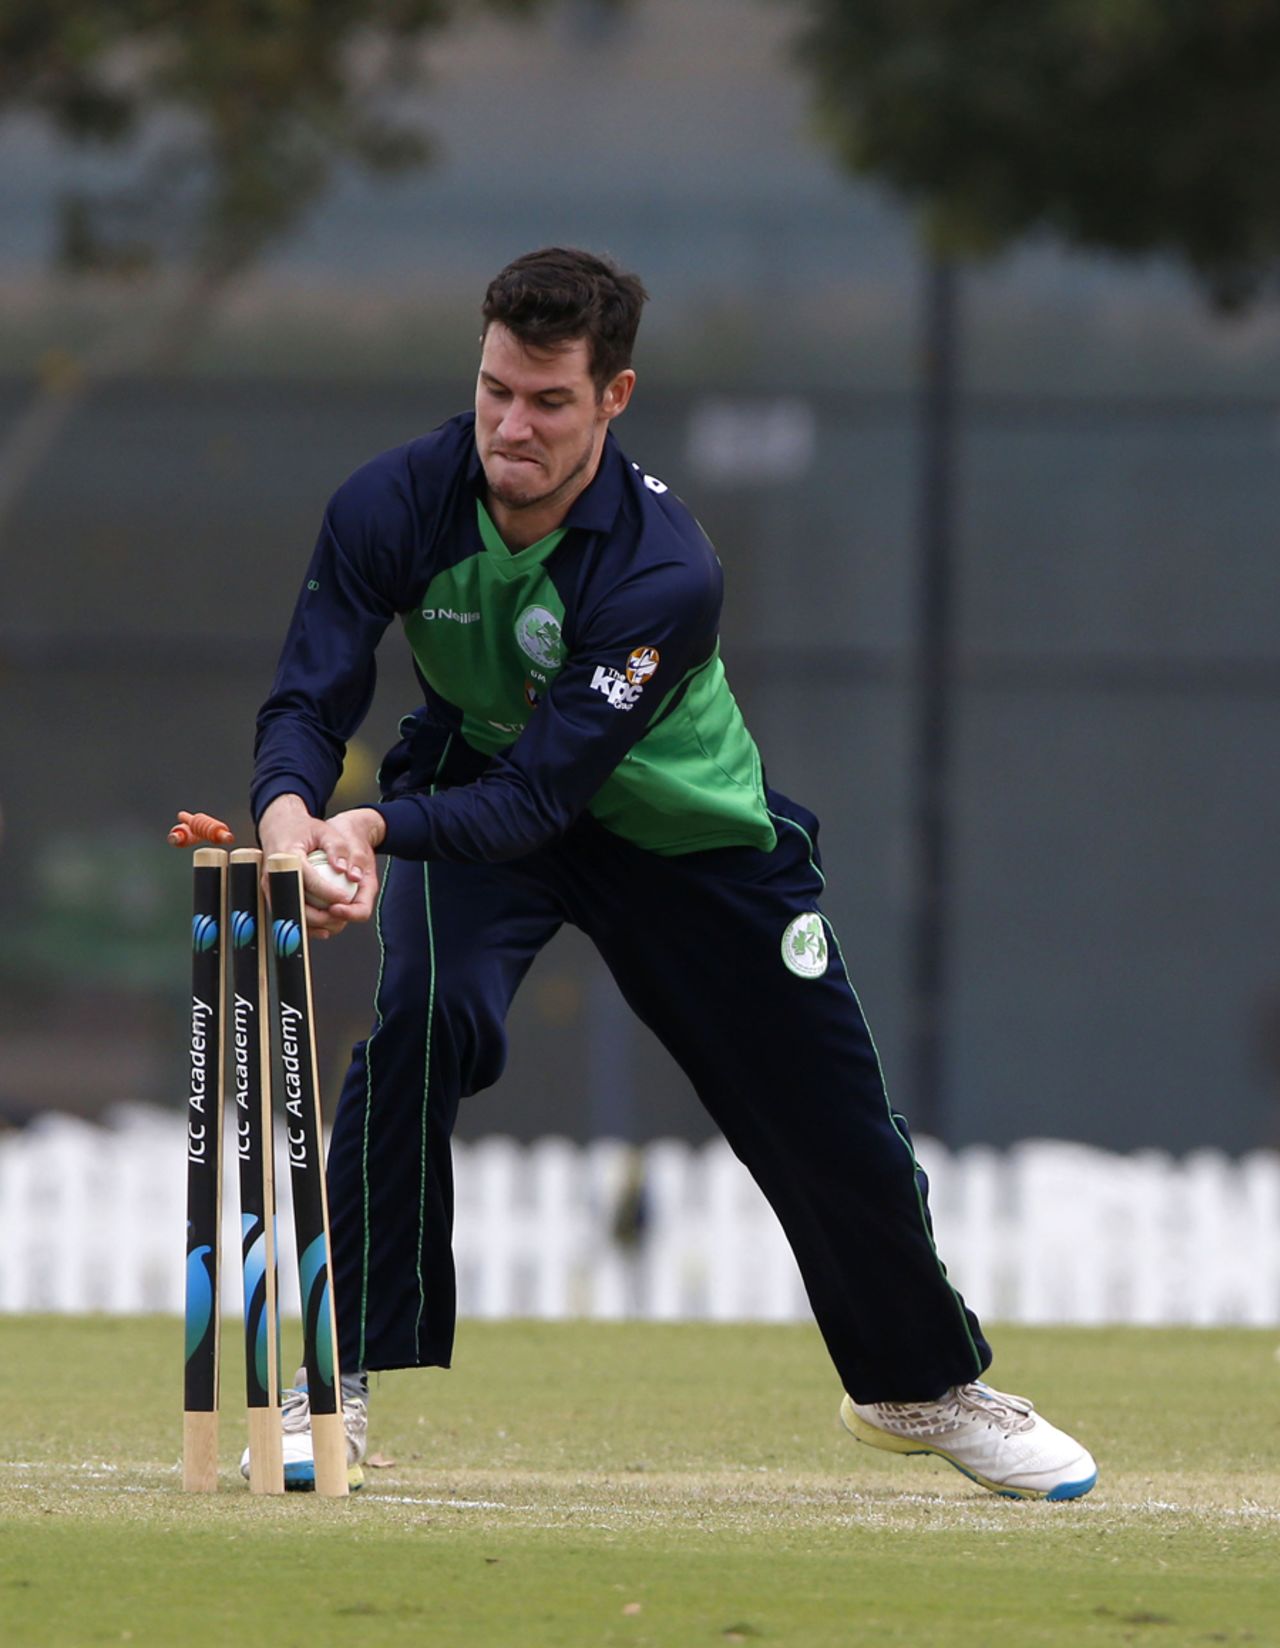 George Dockrell takes the bails off to run out Shaiman Anwar, Ireland v United Arab Emirates, 1st ODI, Dubai, March 2, 2017
